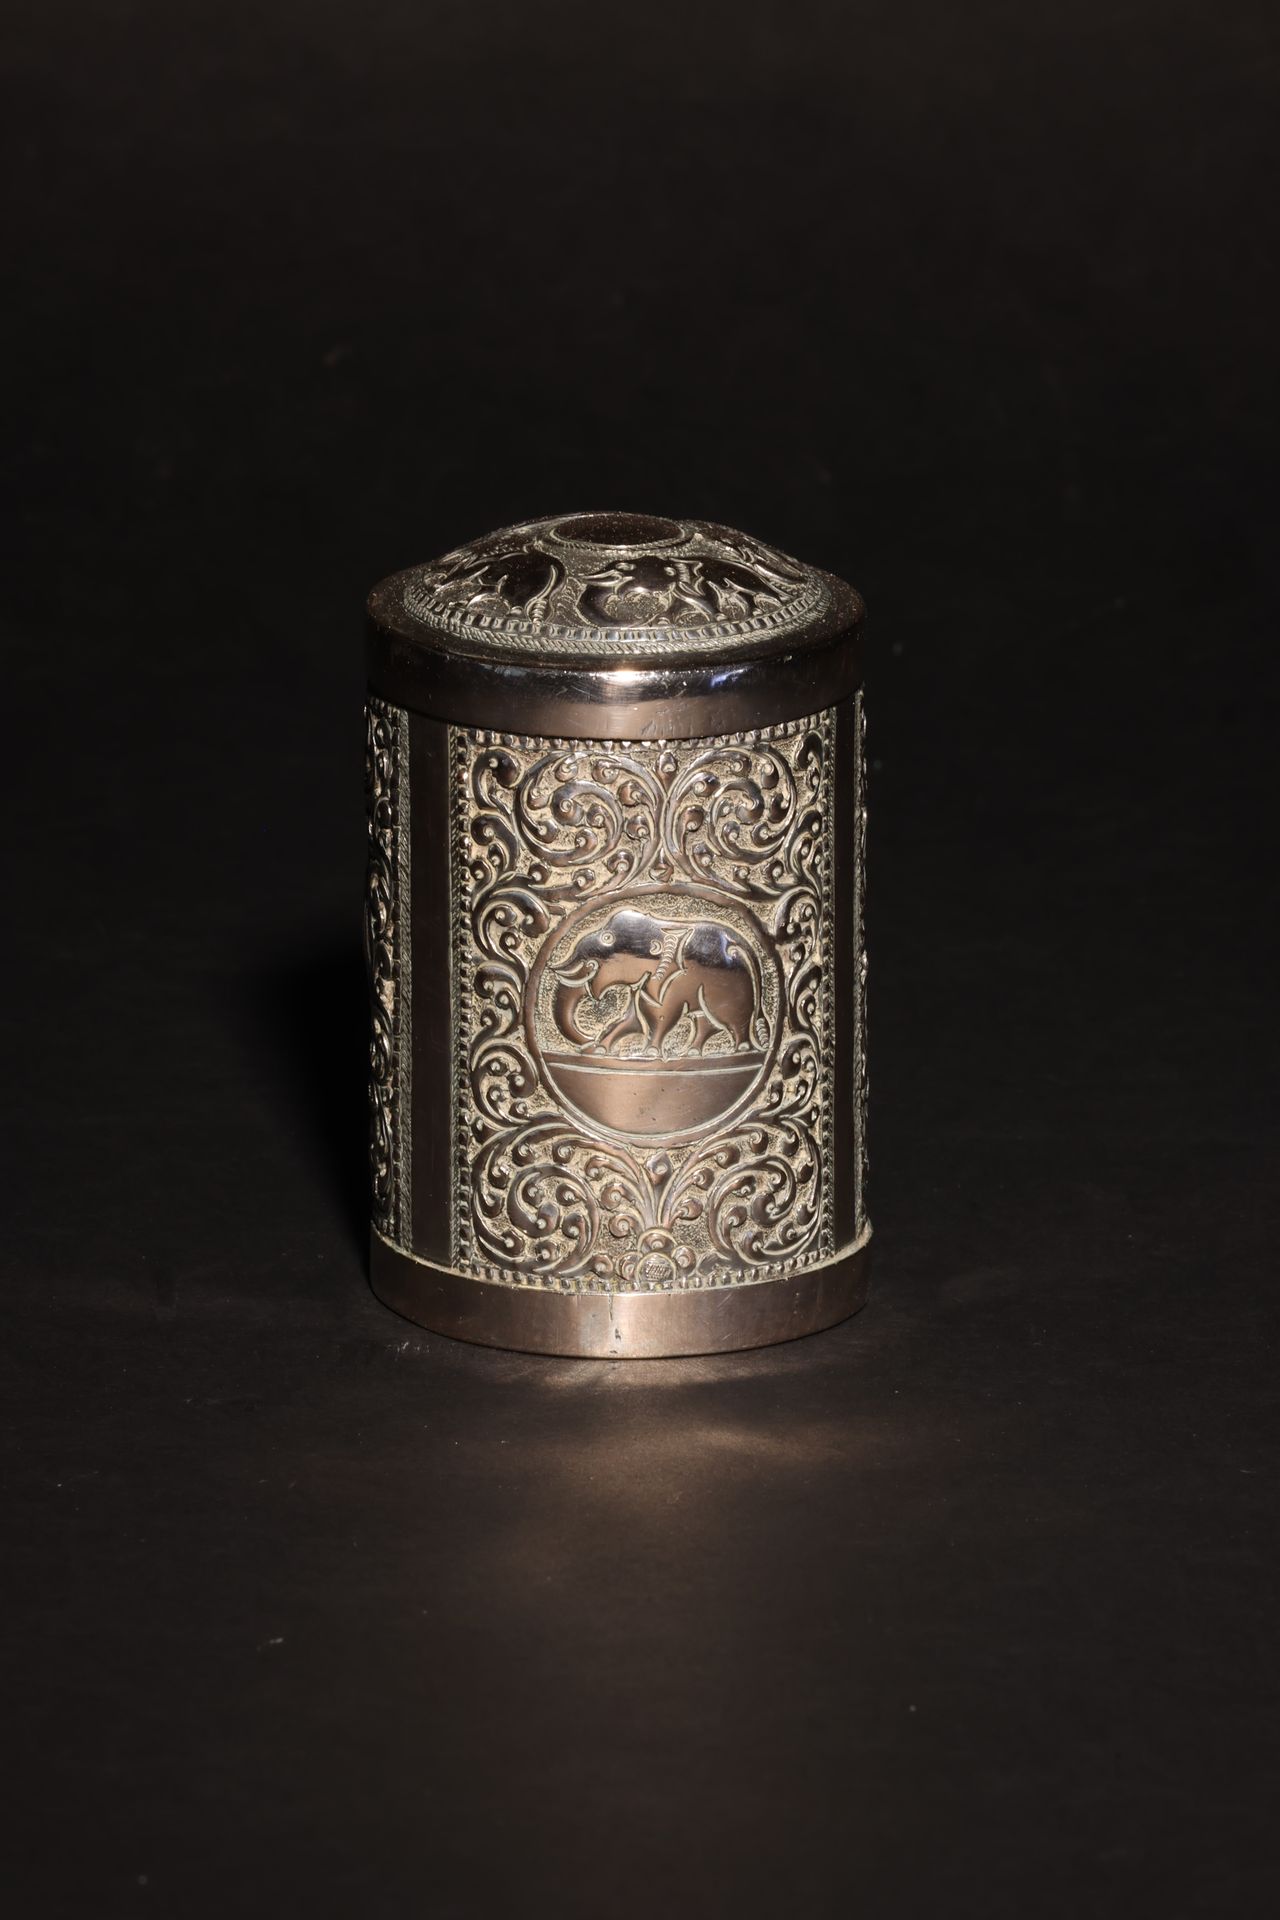 An Antique South Asian Cylindrical Silver Casket and Domed Lid 古老的南亚圆柱形银质匣子和圆顶盖子&hellip;